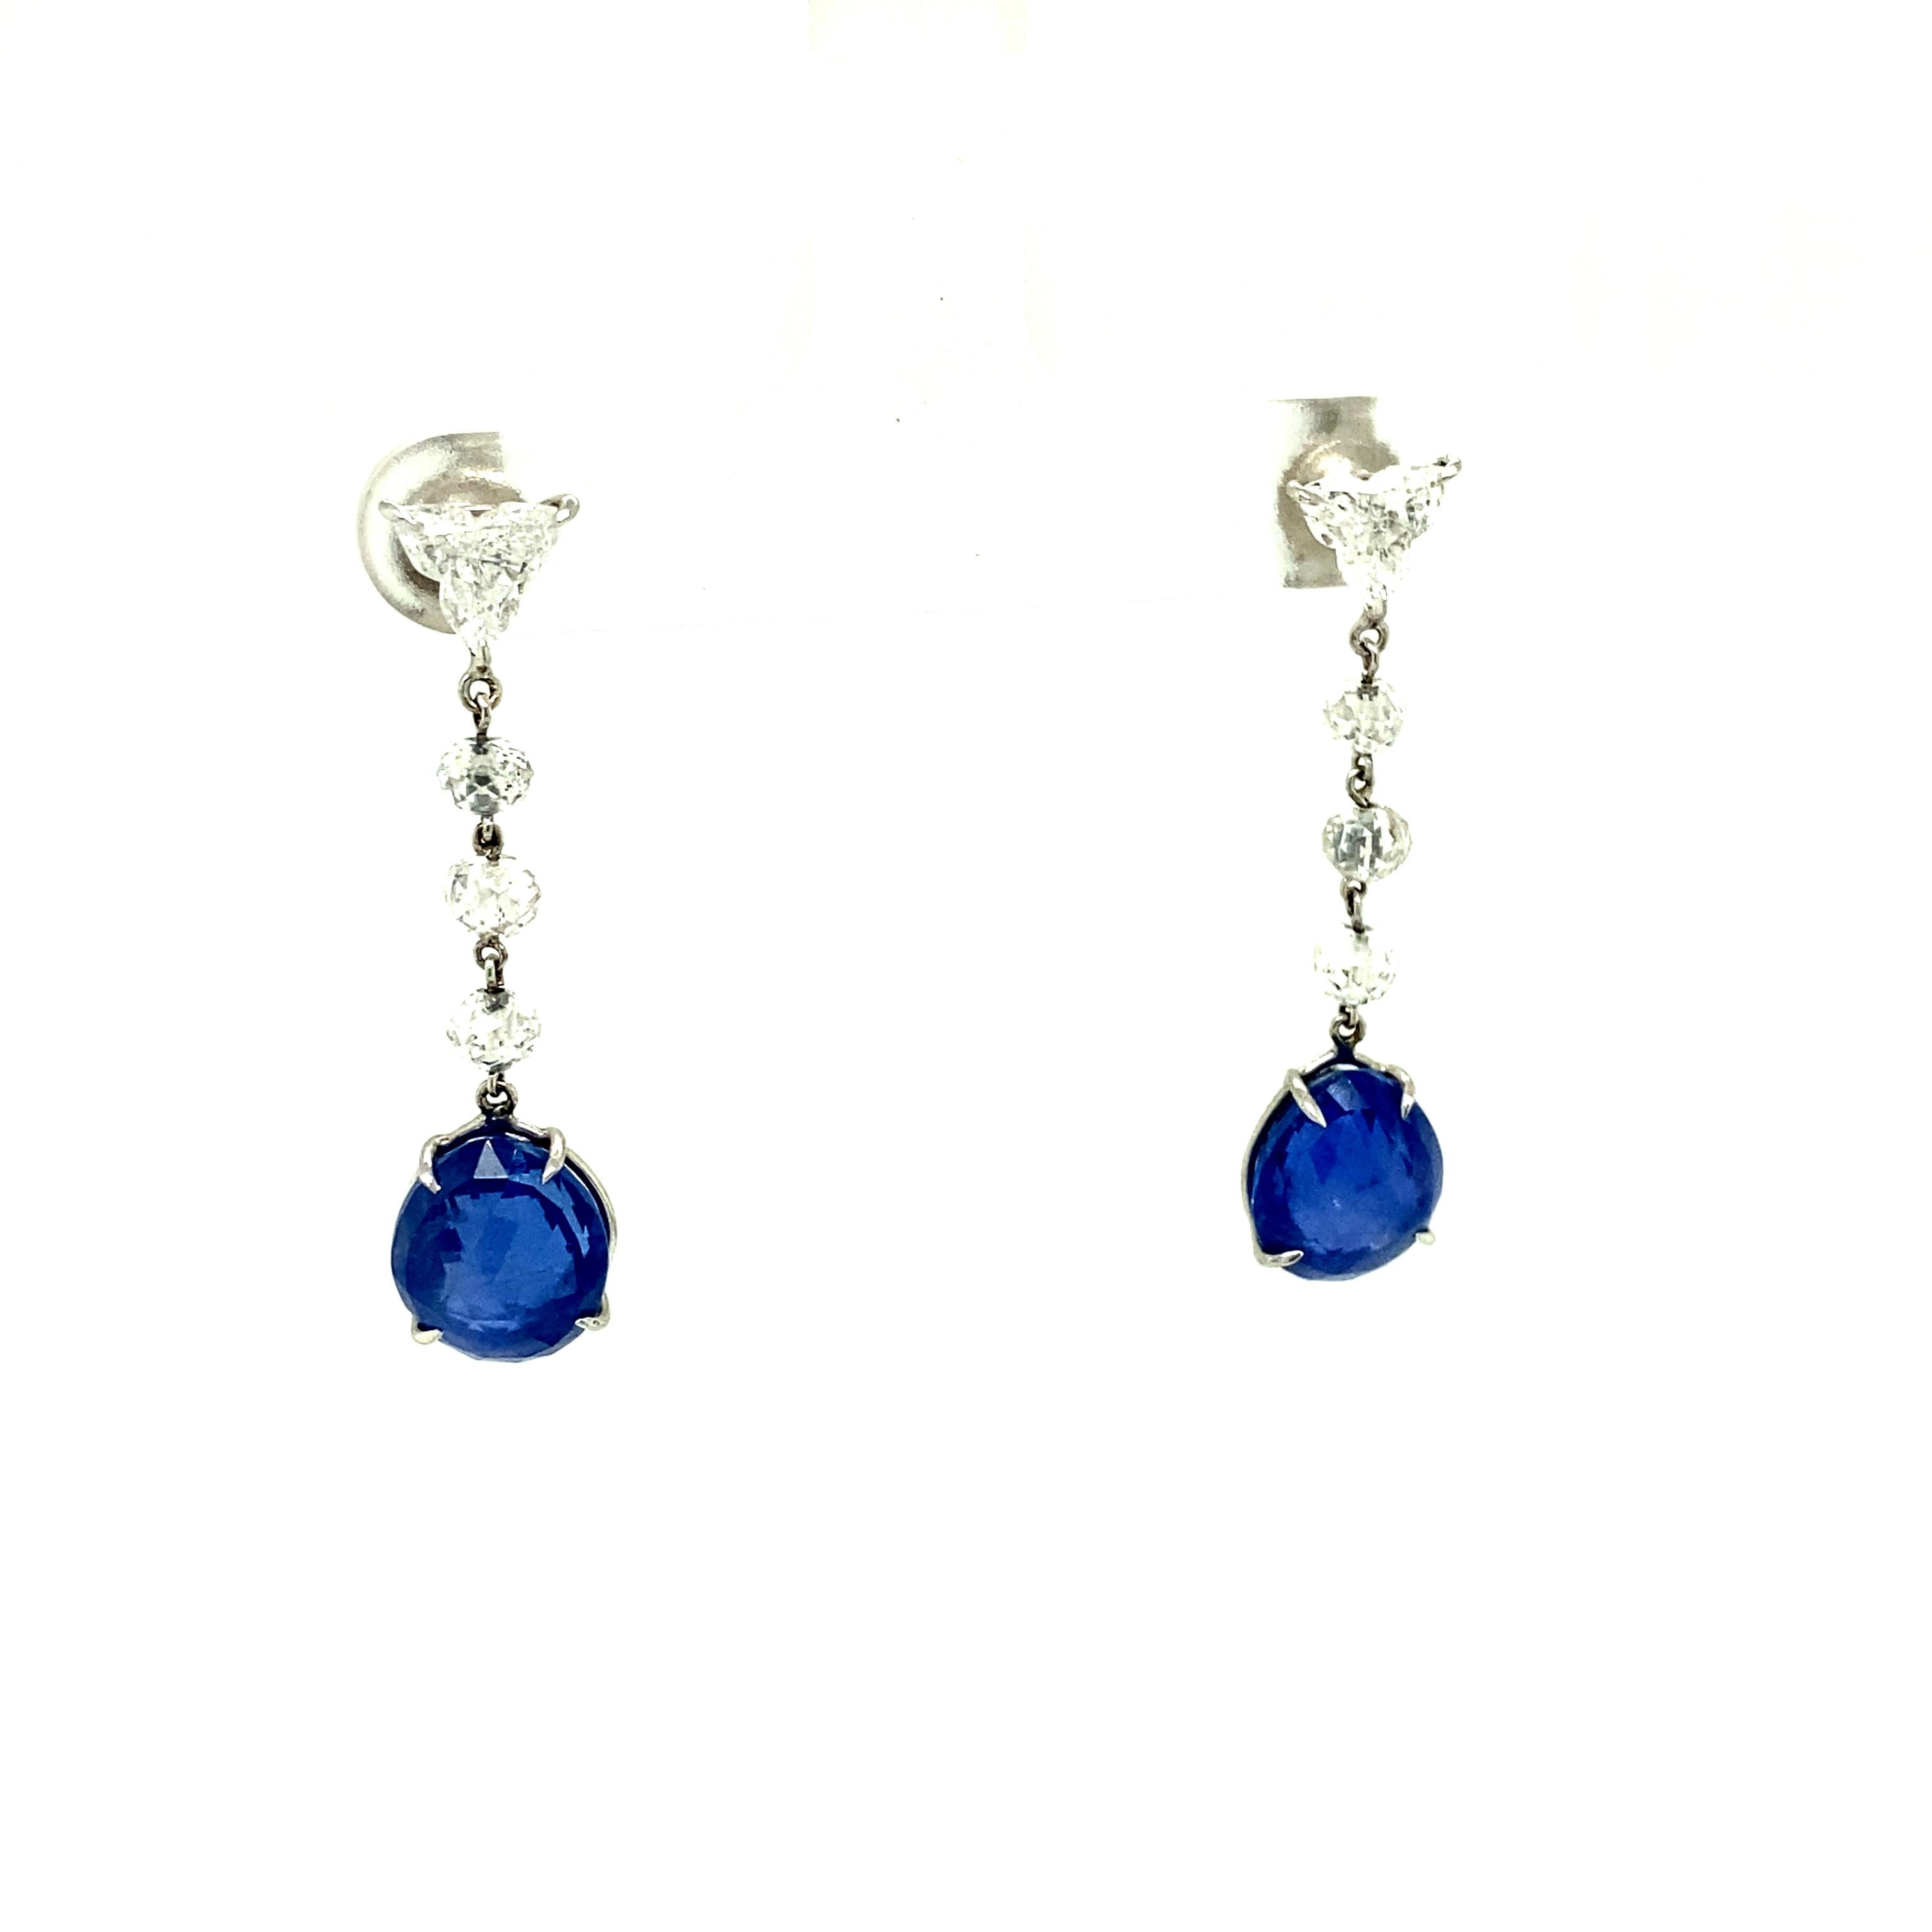 10.56 Carat GRS Certified Unheated Blue Sapphires and White Diamond Earrings:

A gorgeous pair of earrings, it features two unheated blue sapphire briolettes weighing 10.56 carat, with six white diamond beads and two fancy cut white diamonds